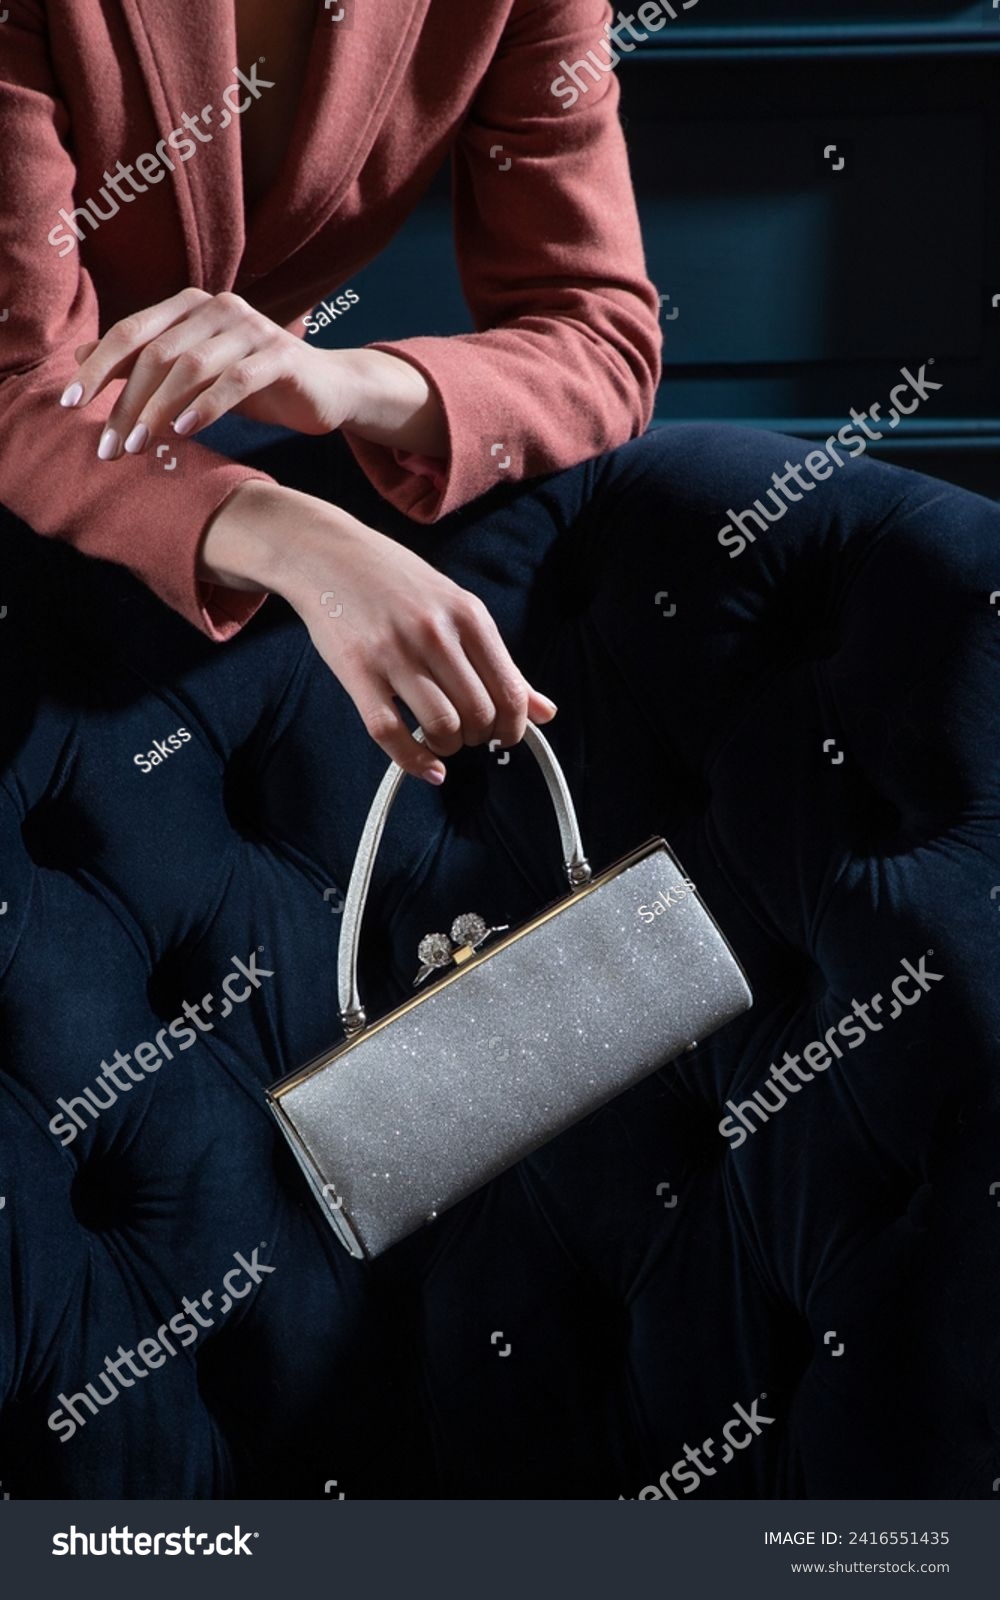 Silver metallic sparkling purse held by woman hands on a blue velour armchair background. Creative shiny woman hand bag studio photography. #2416551435